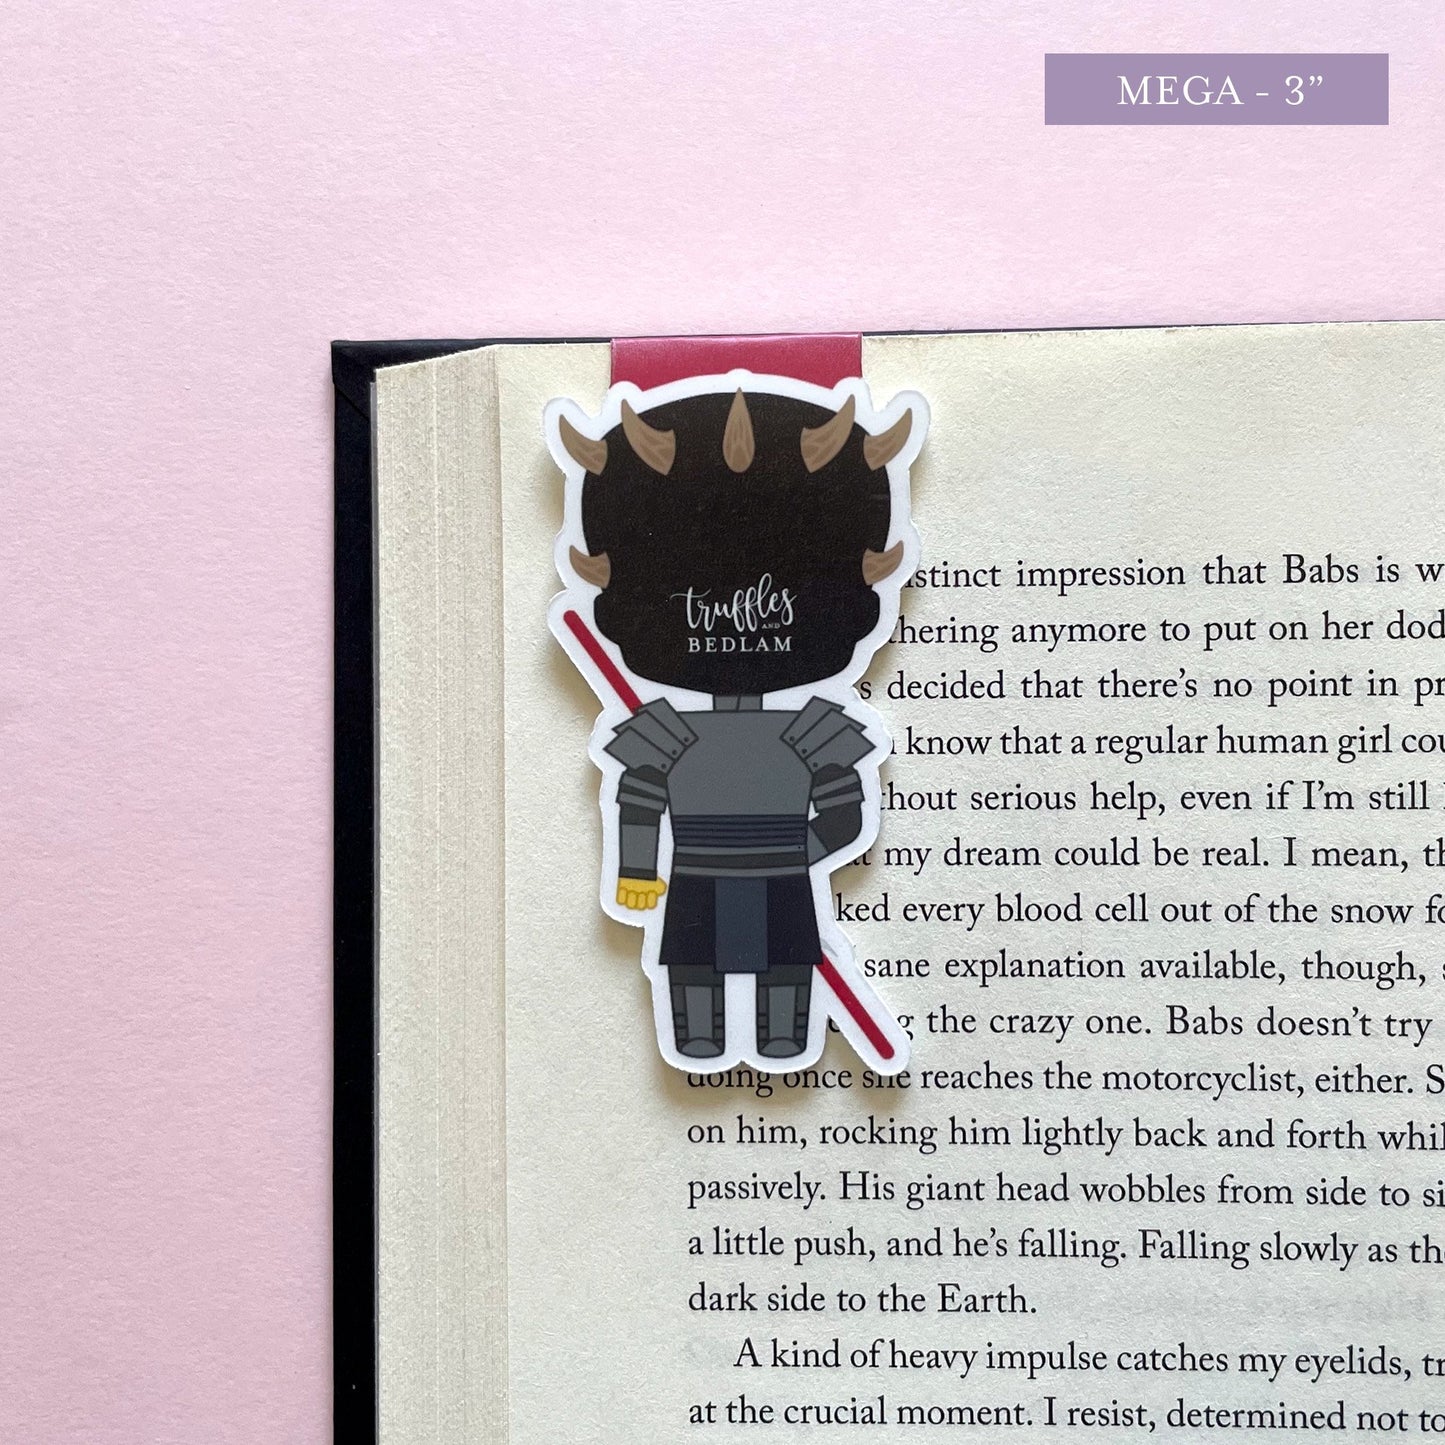 Space Wizards "Savage Opress" Magnetic Bookmark